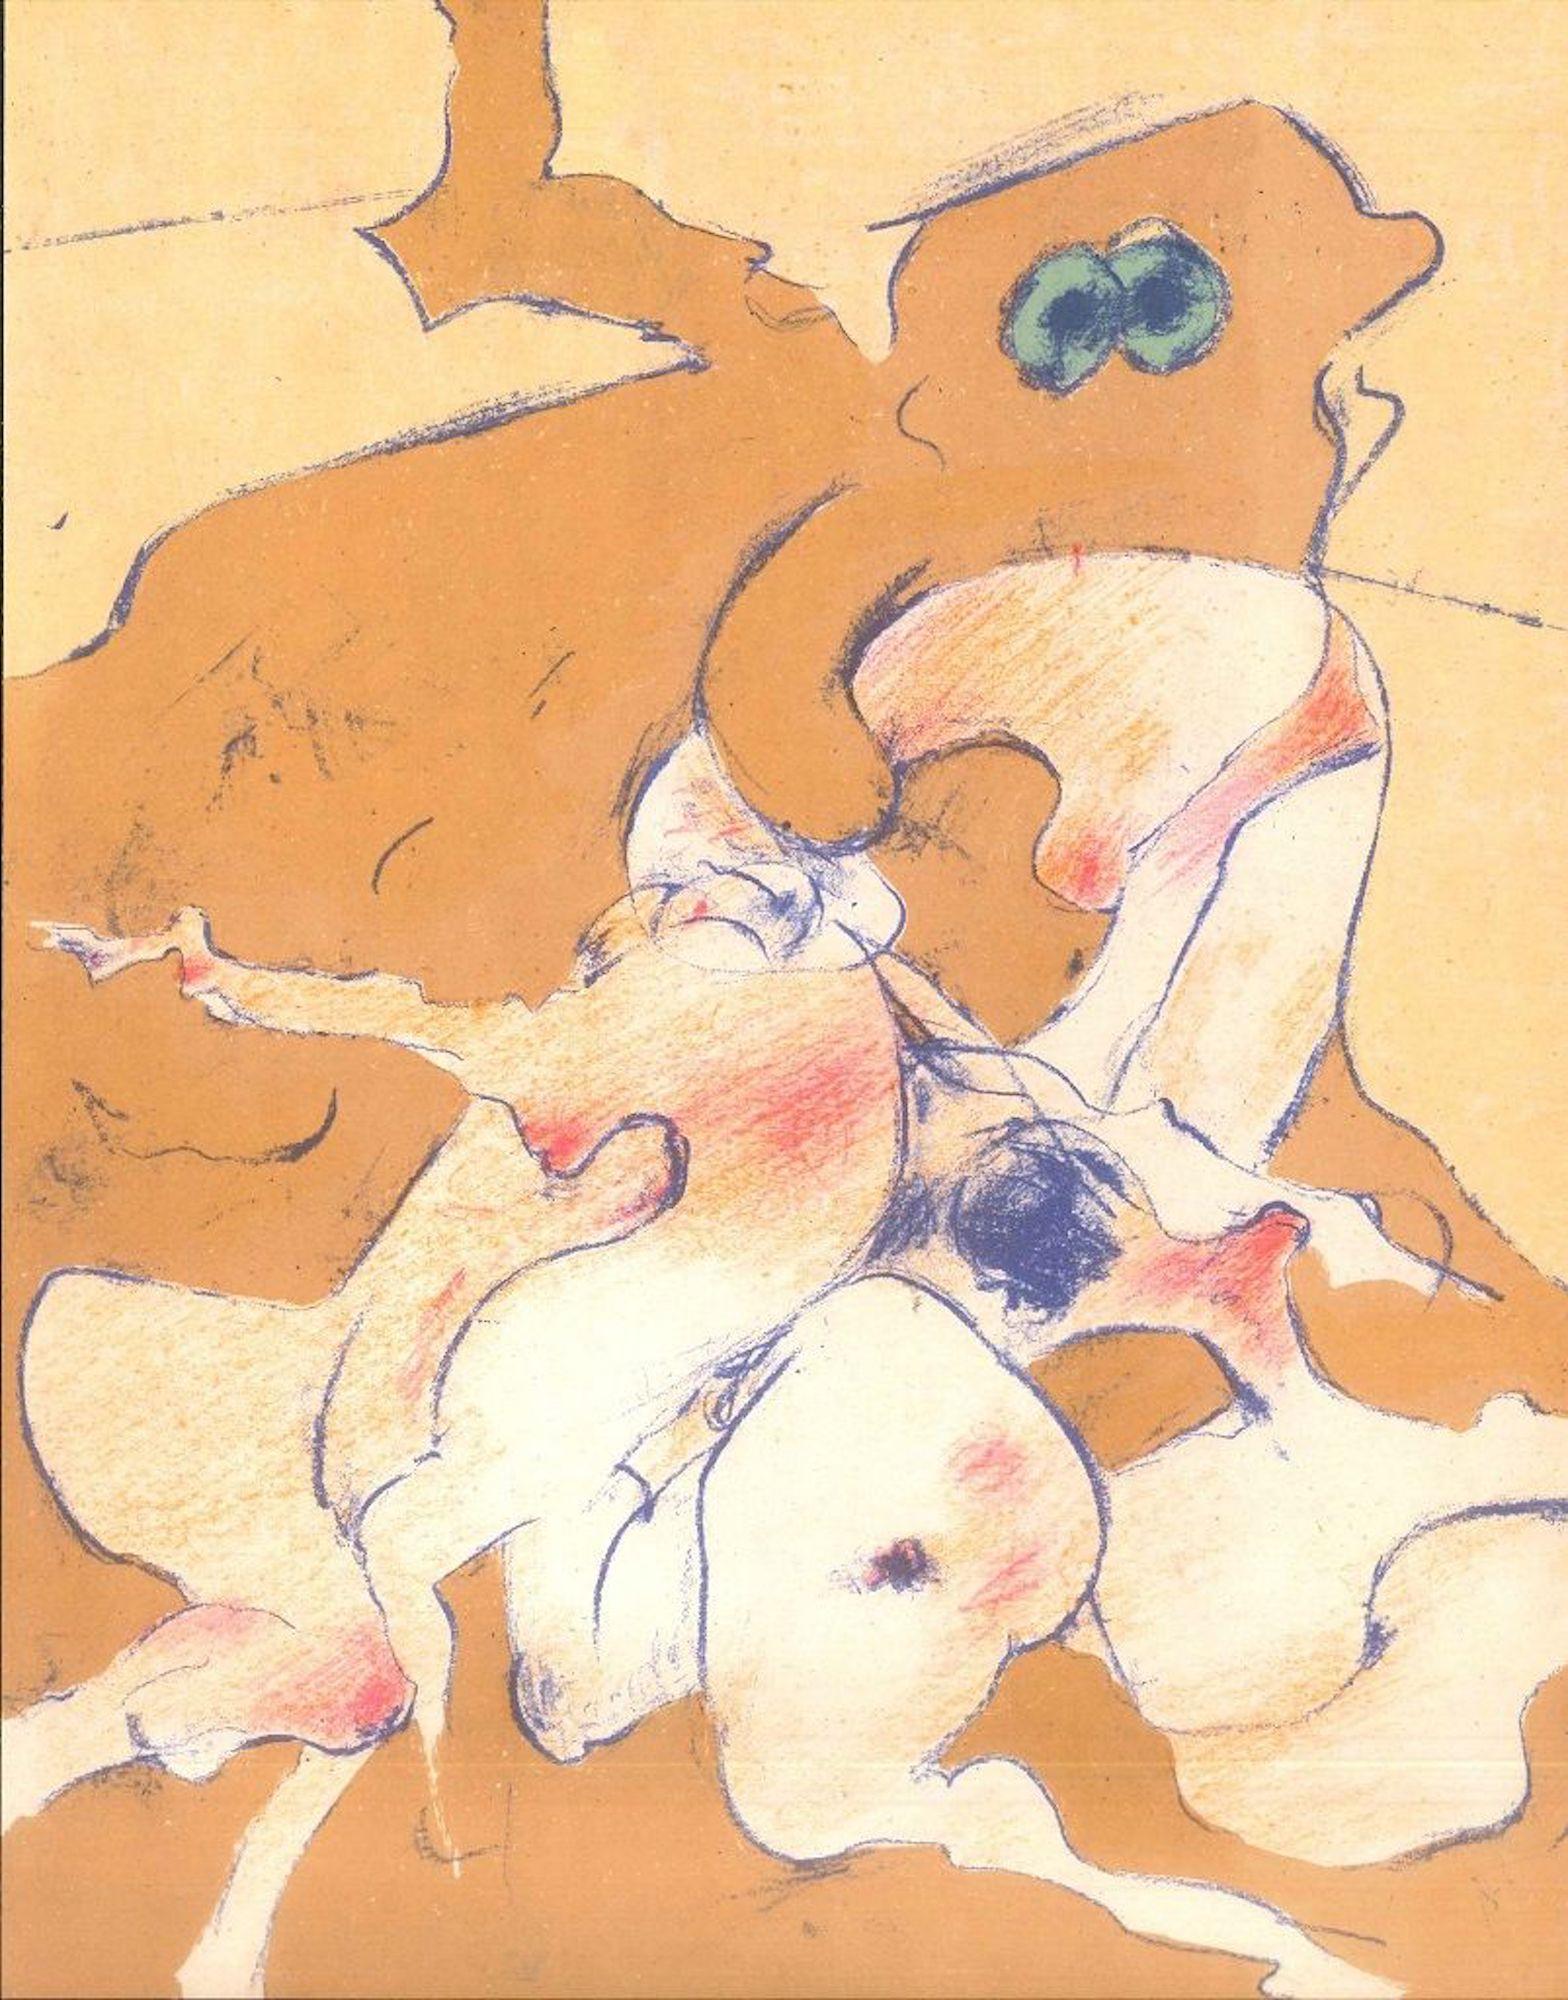 Untitled is an original artwork realized by Dorothea Tanning in 1974 for the Art Magazine "XXeme Siècle".

Original colored lithograph.

Good conditions. Printed by Atelier Pierre Chave in Vence, France.

This lithograph was realized by the artist